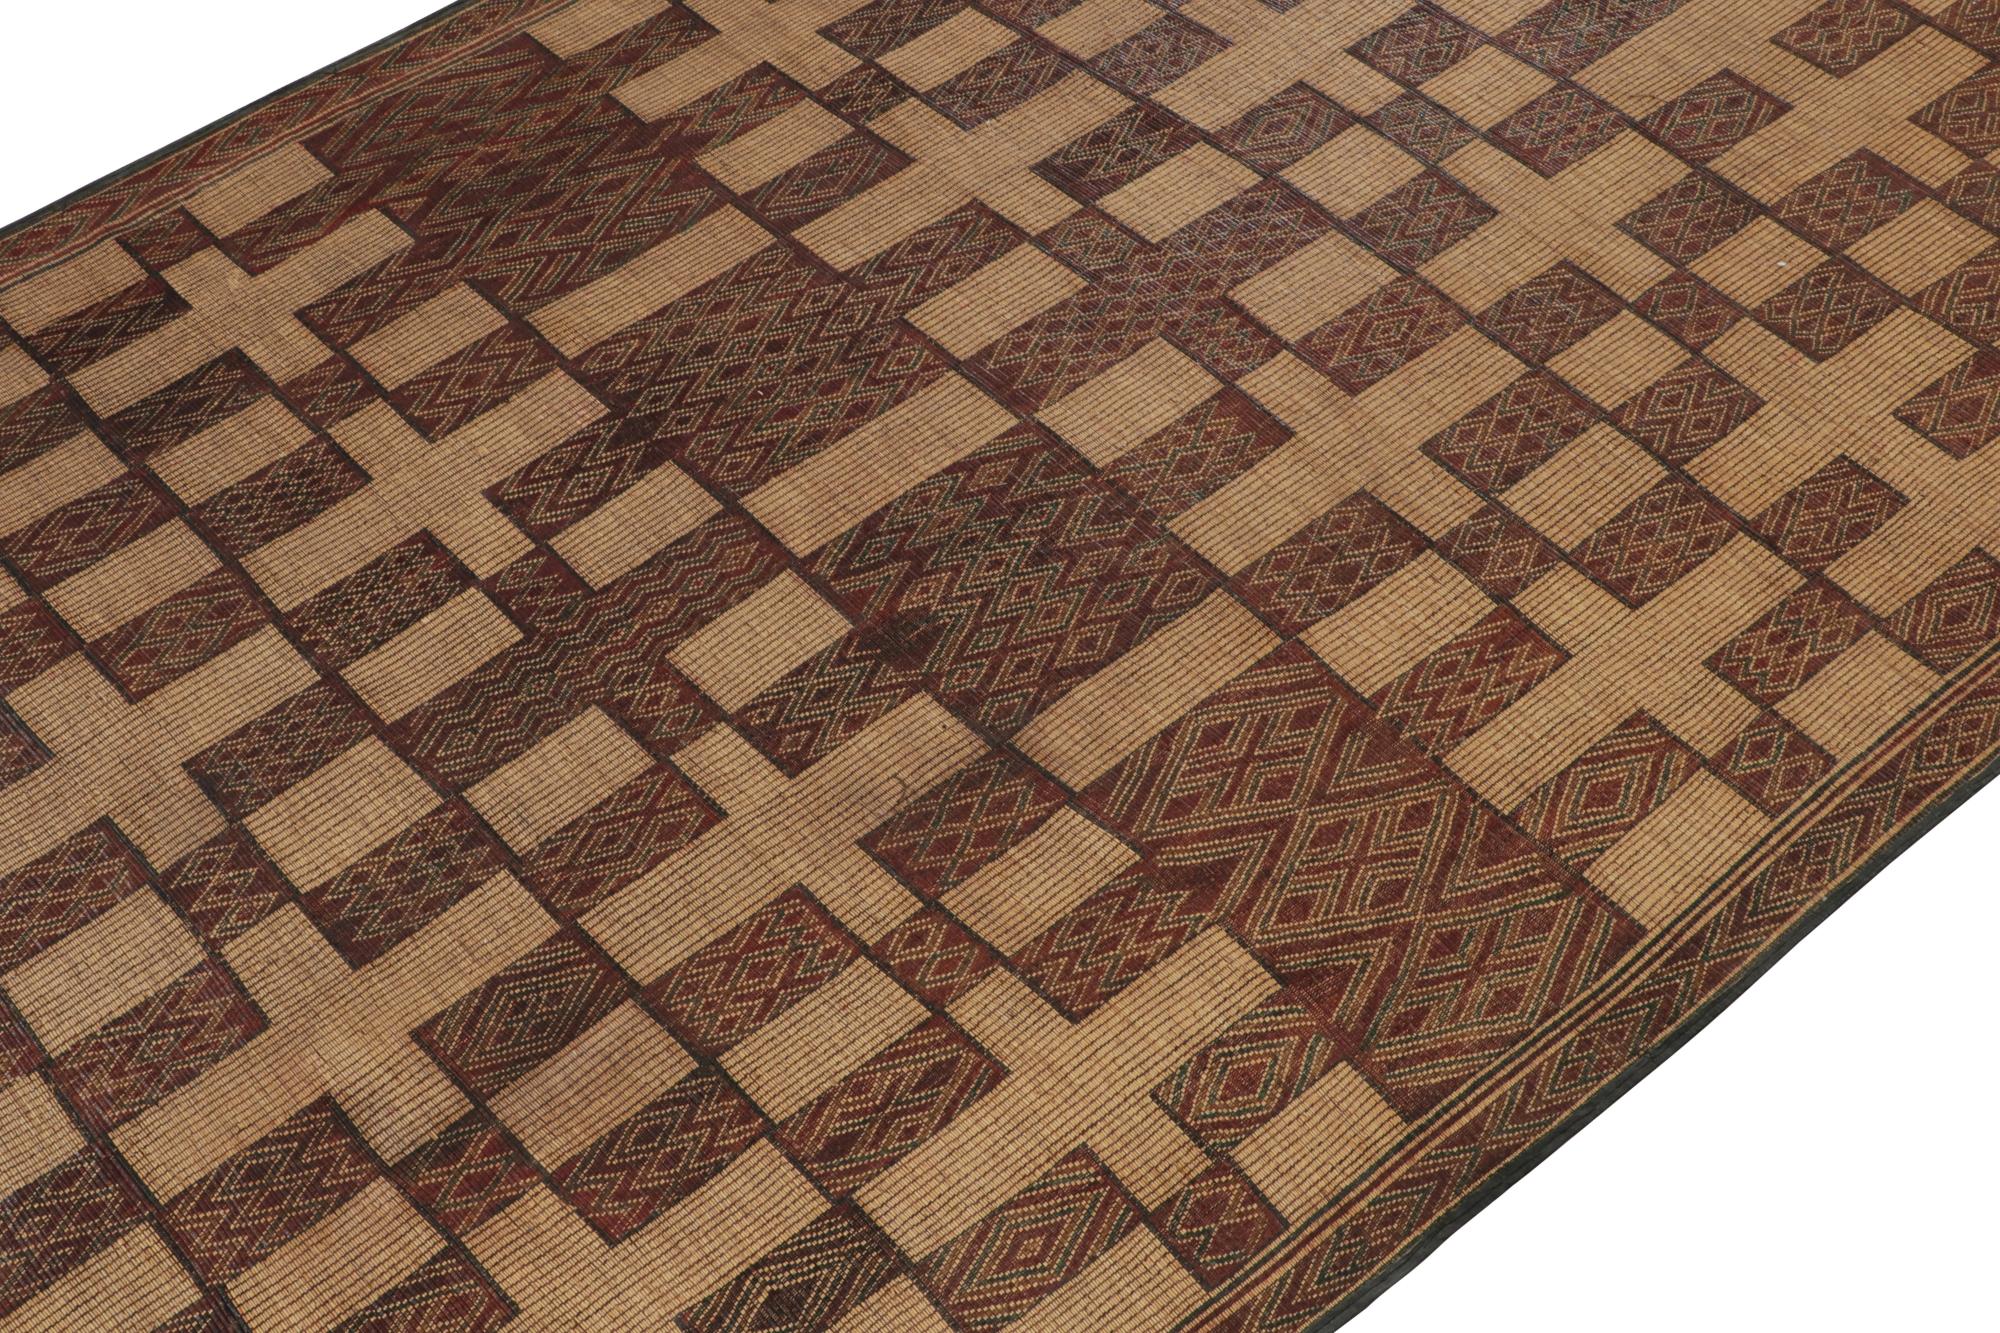 This vintage Moroccan gallery runner is an 8x14 Tuareg mat from the nomadic tribe of the same name. Handwoven with reeds and leather circa 1950-1960, its natural materials enjoy warm beige-brown undertones, and its design plays red squares with